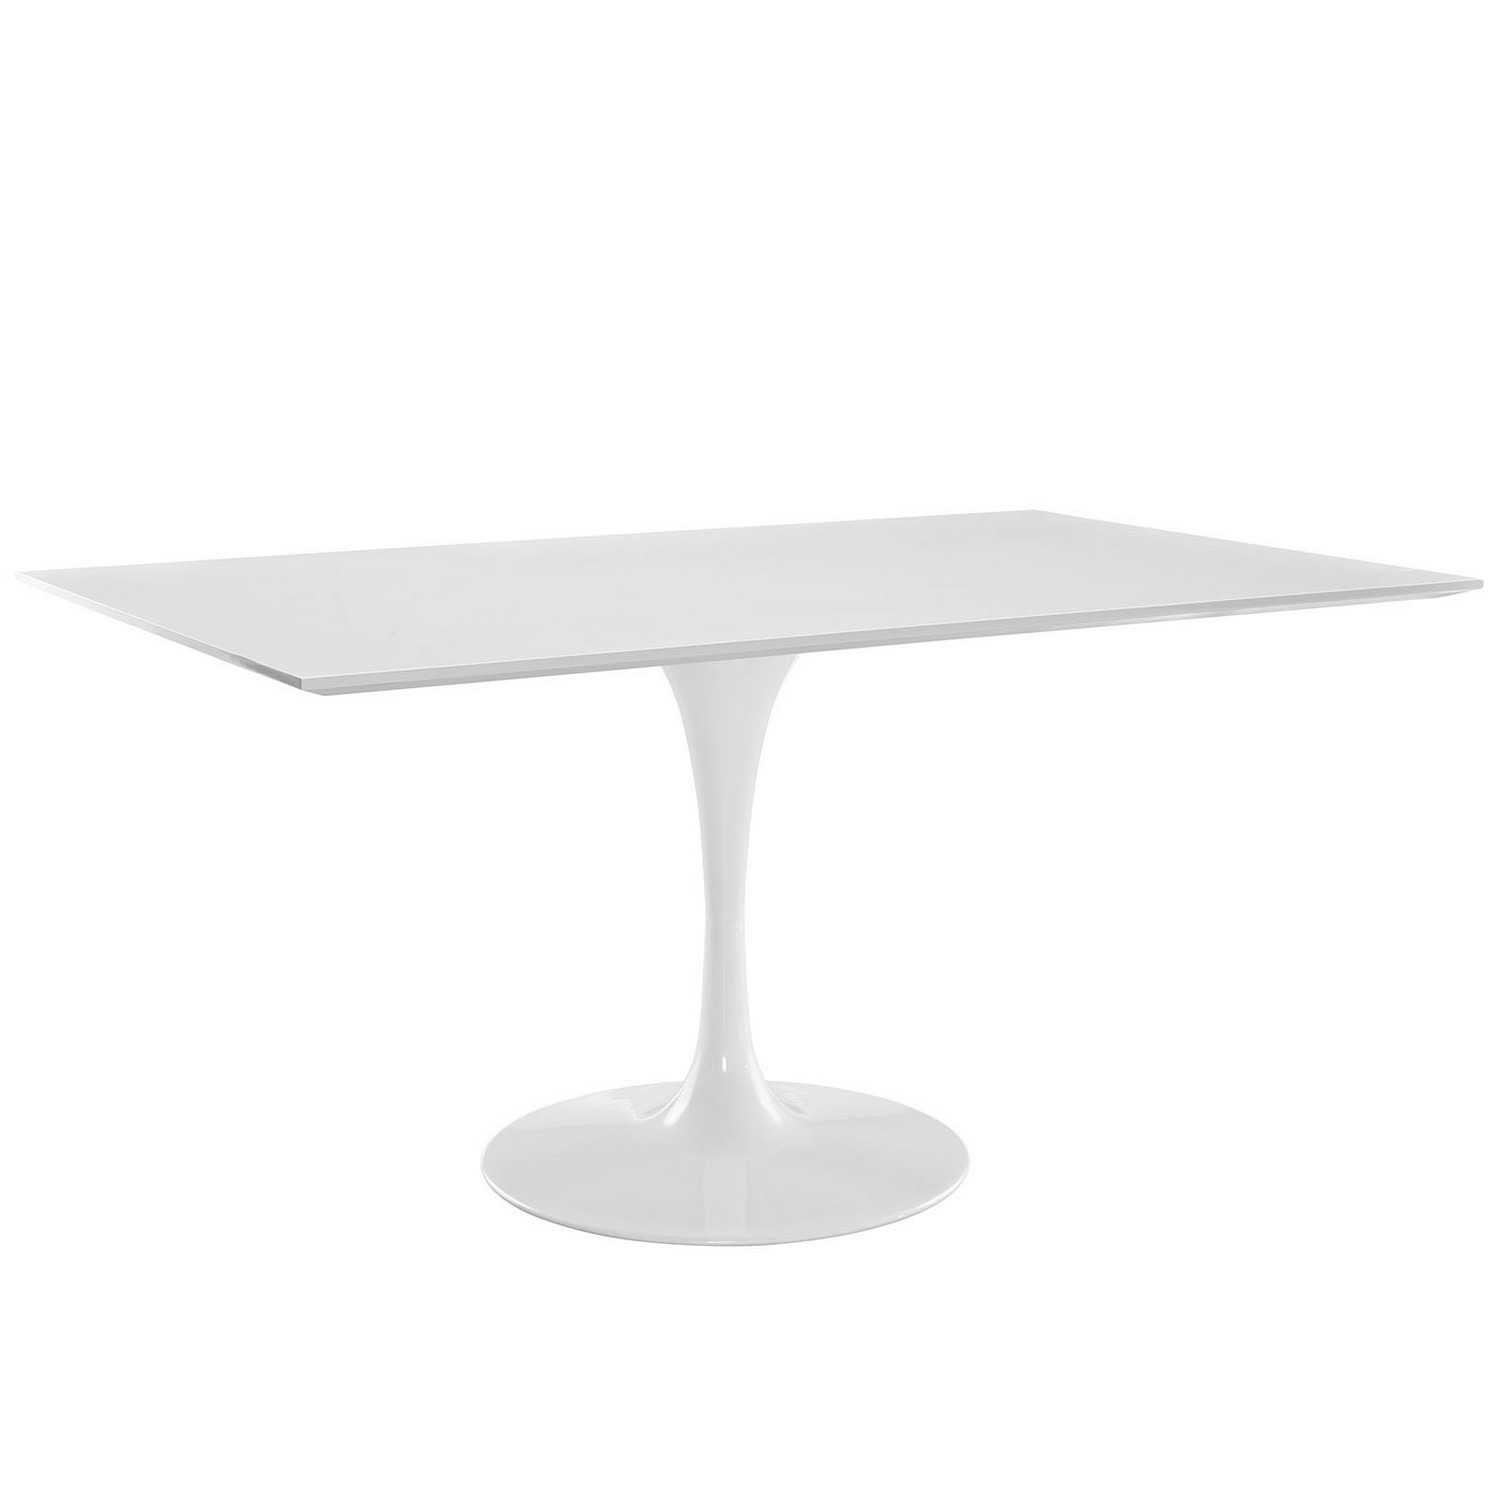 Modway Lippa 60 Rectangle Dining Table - White